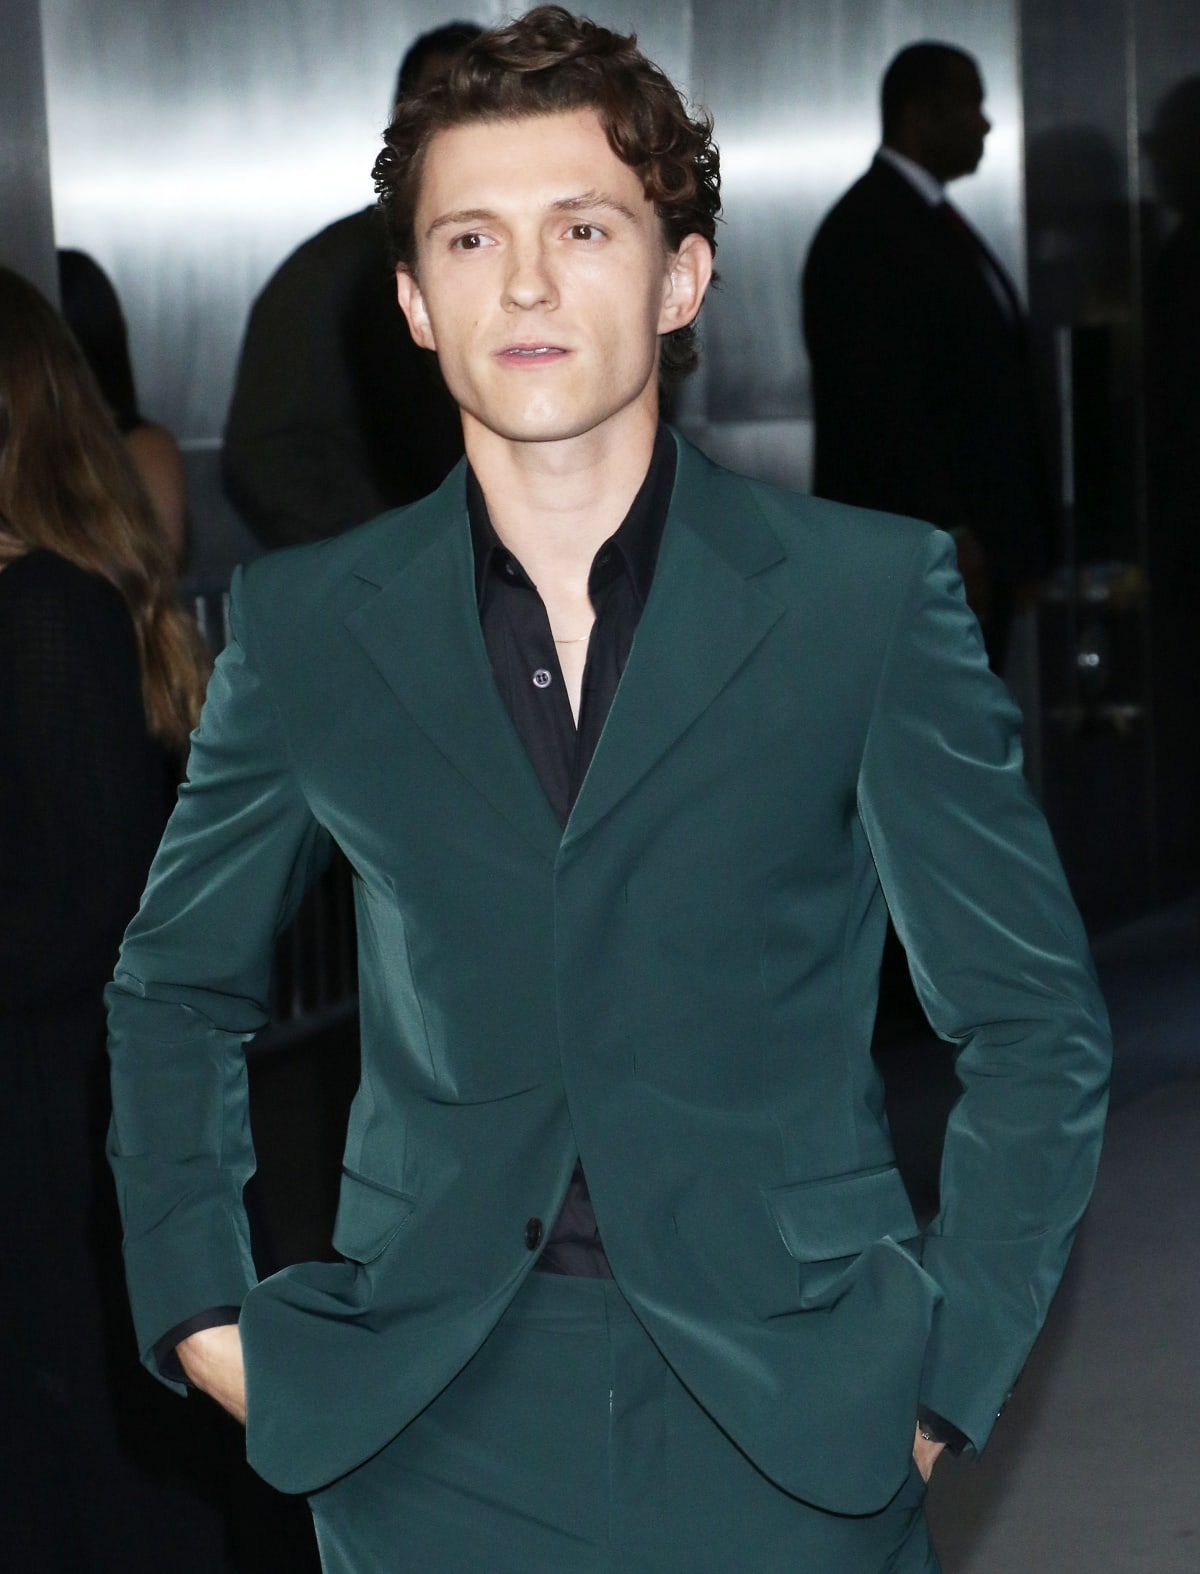 Tom Holland attending the screening of The Crowded Room